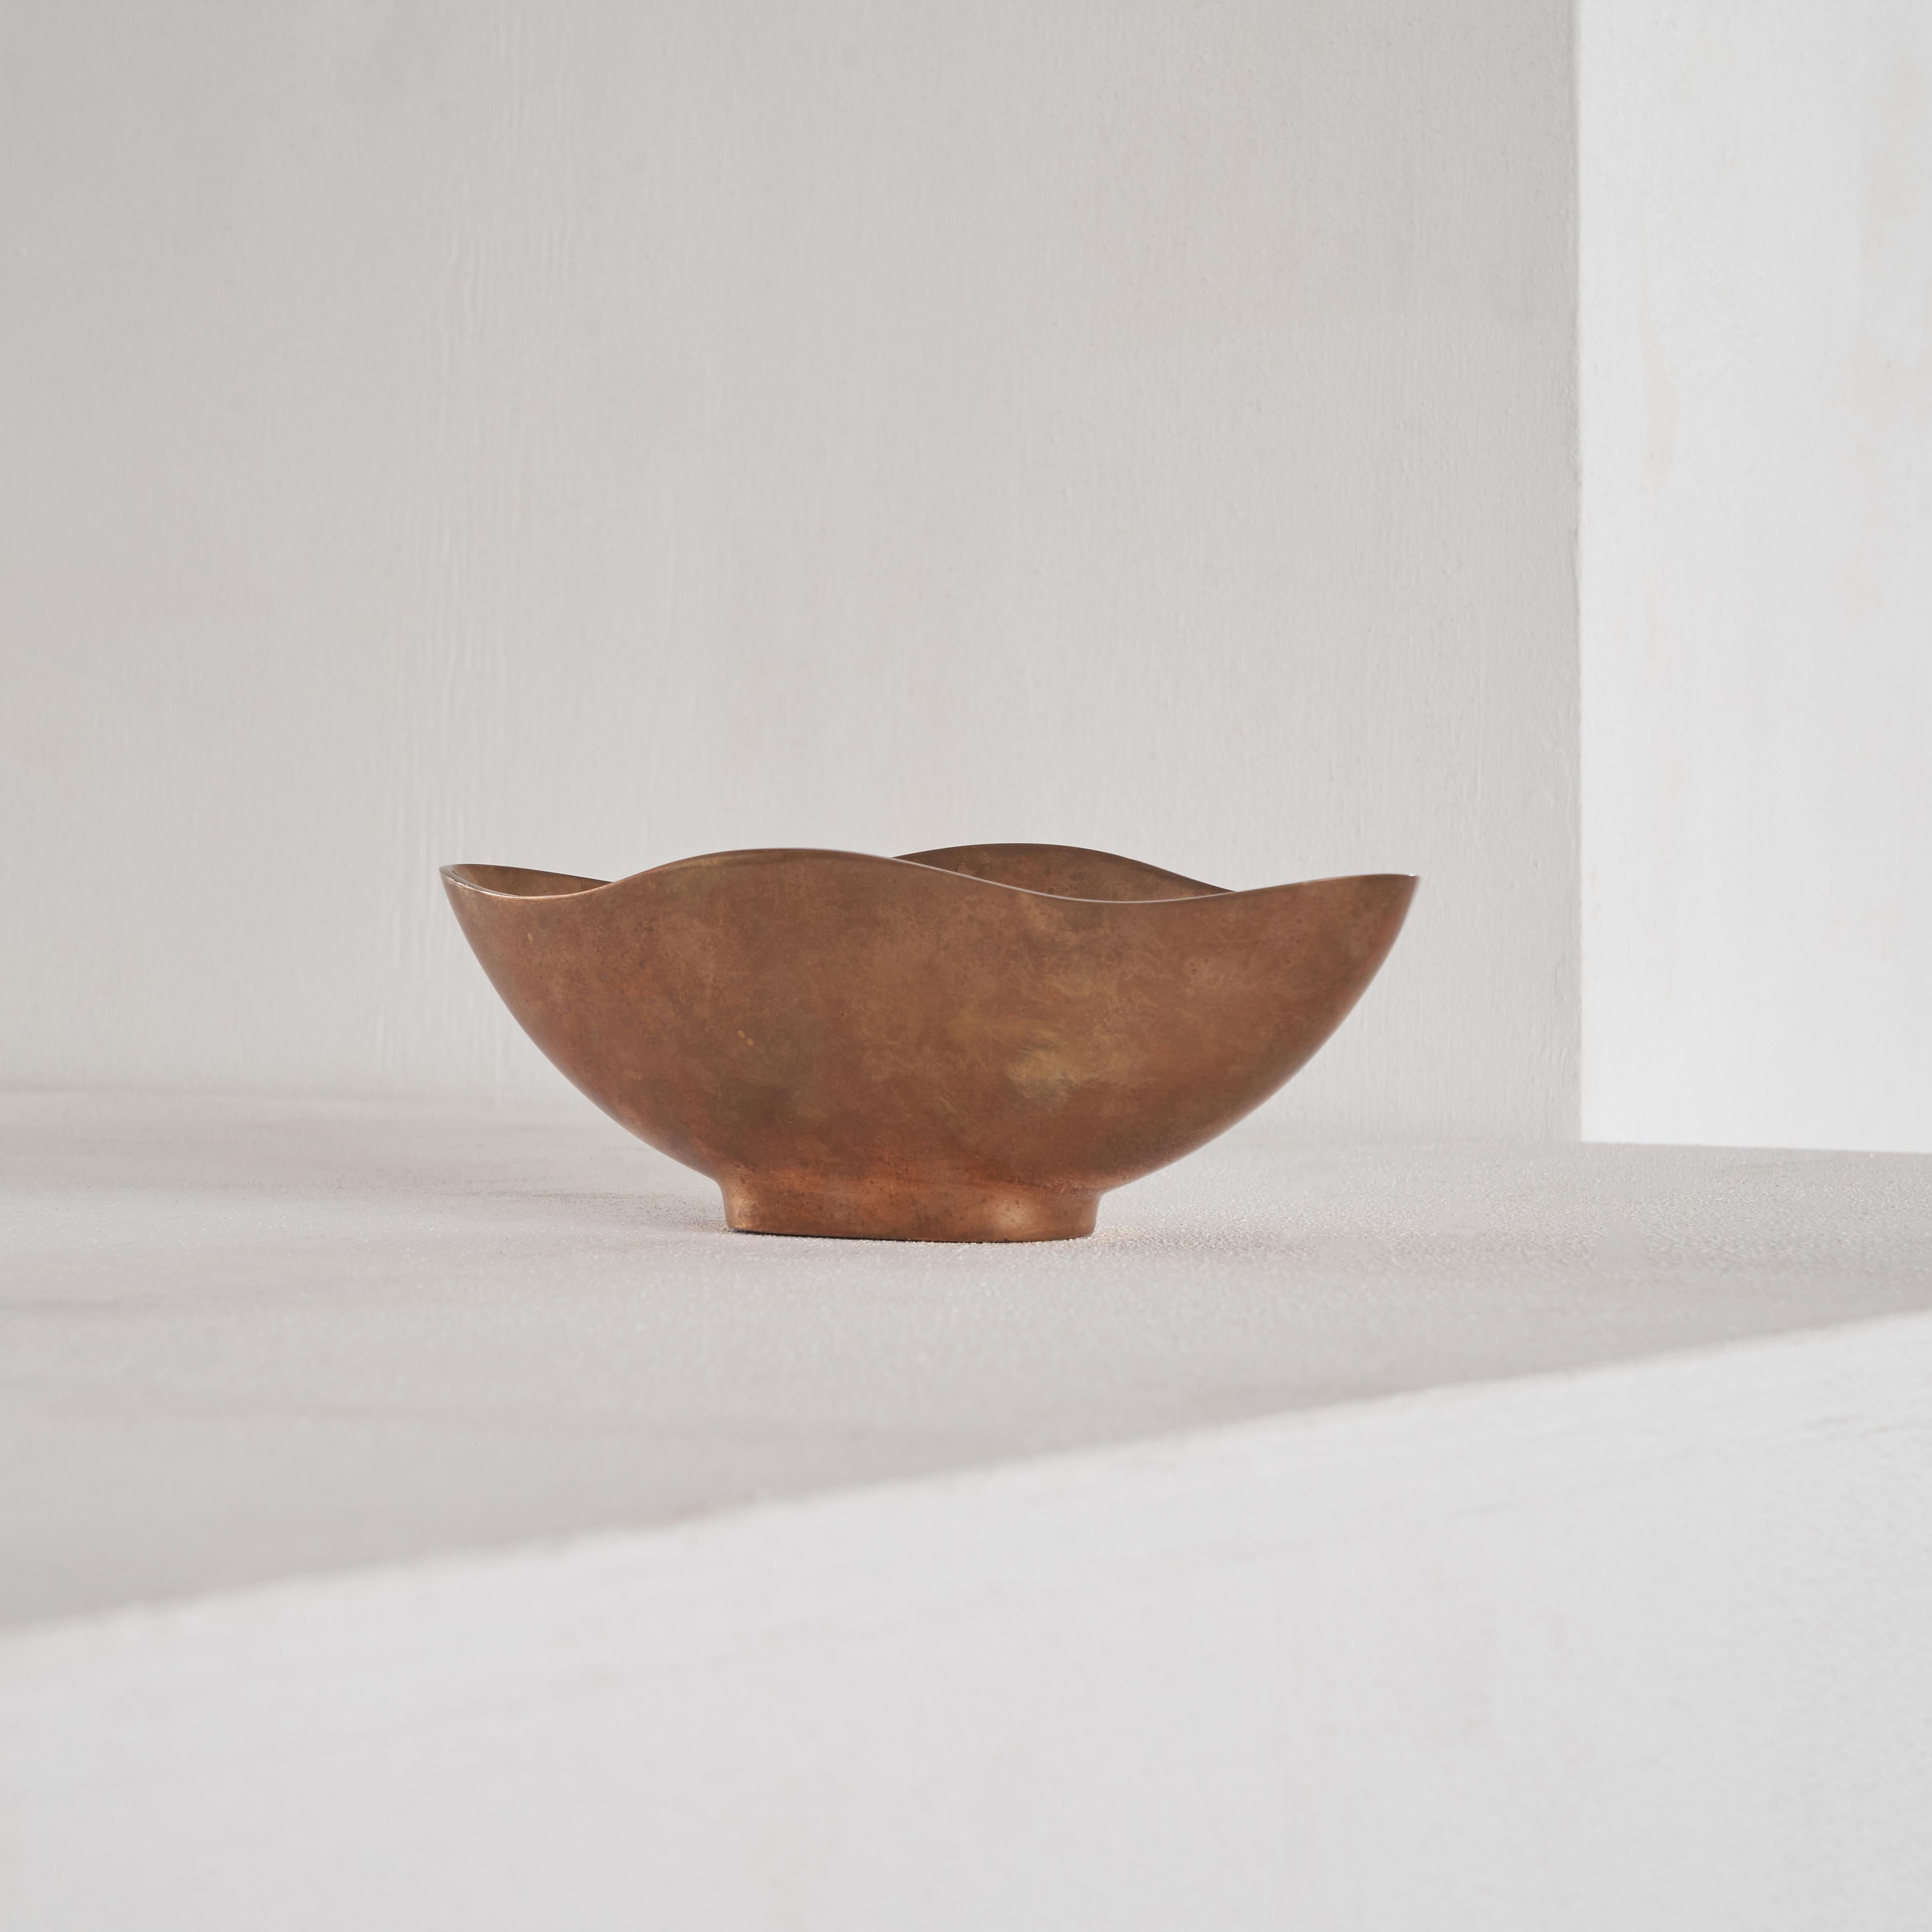 Sculptural 1970s Esa Fedrigolli bowl in solid sand cast bronze. Beautiful timeless lines and shapes. The patination and colors give this bowl a very distinct and elegant appearance. 

Very heavy and solid piece. Signed at the bottom with a